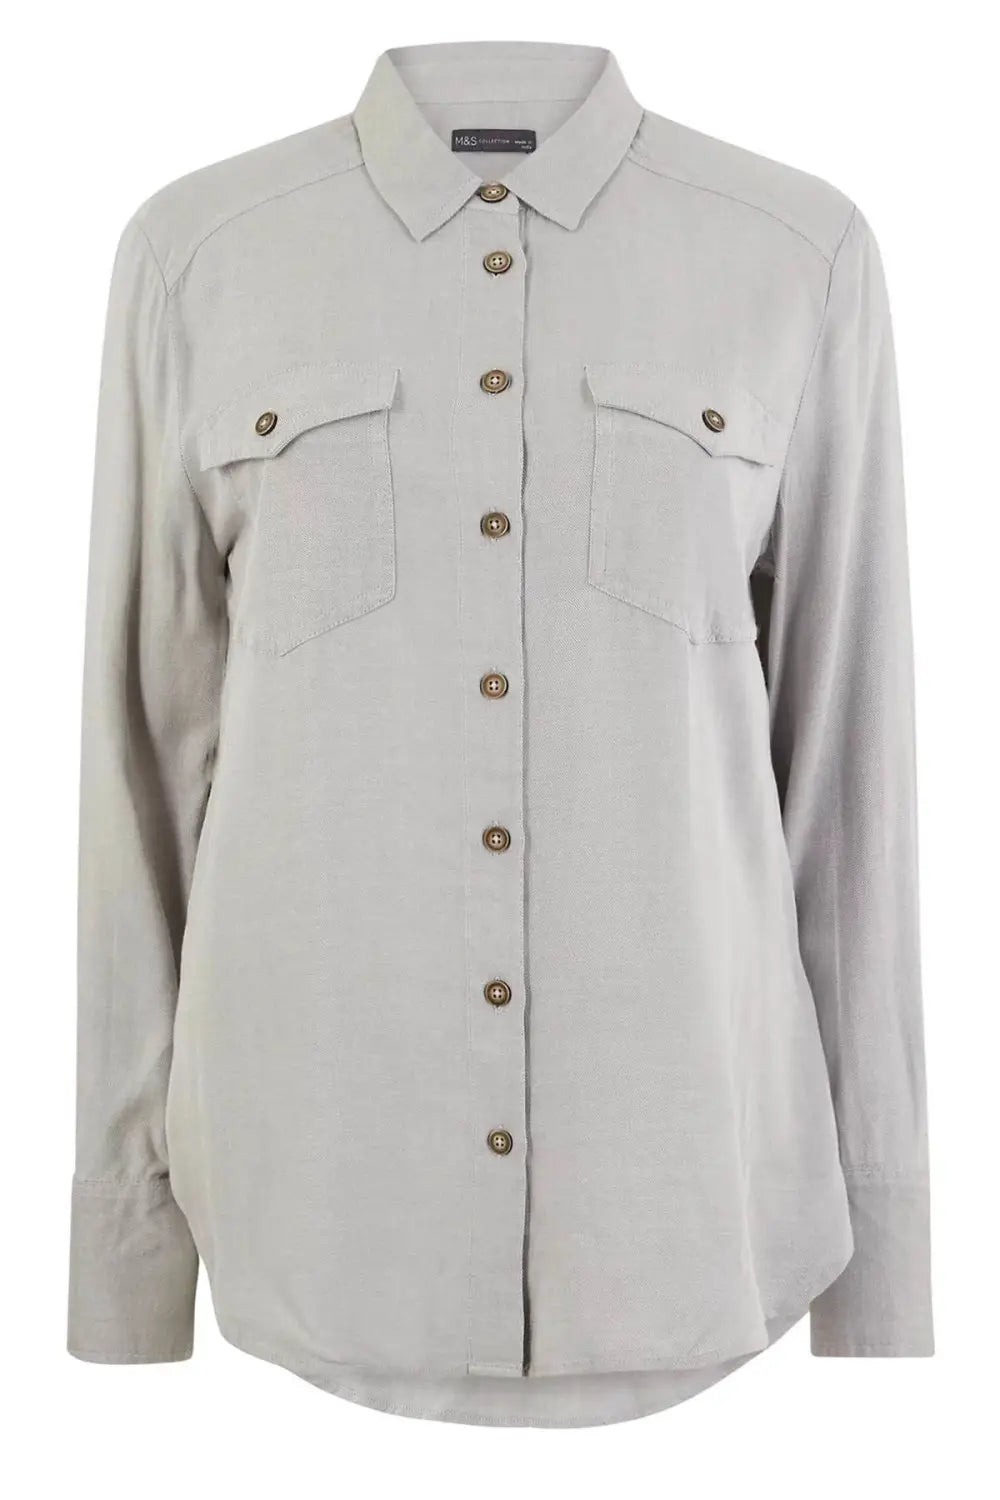 M&S Pocket Detail Relaxed Fit Shirt